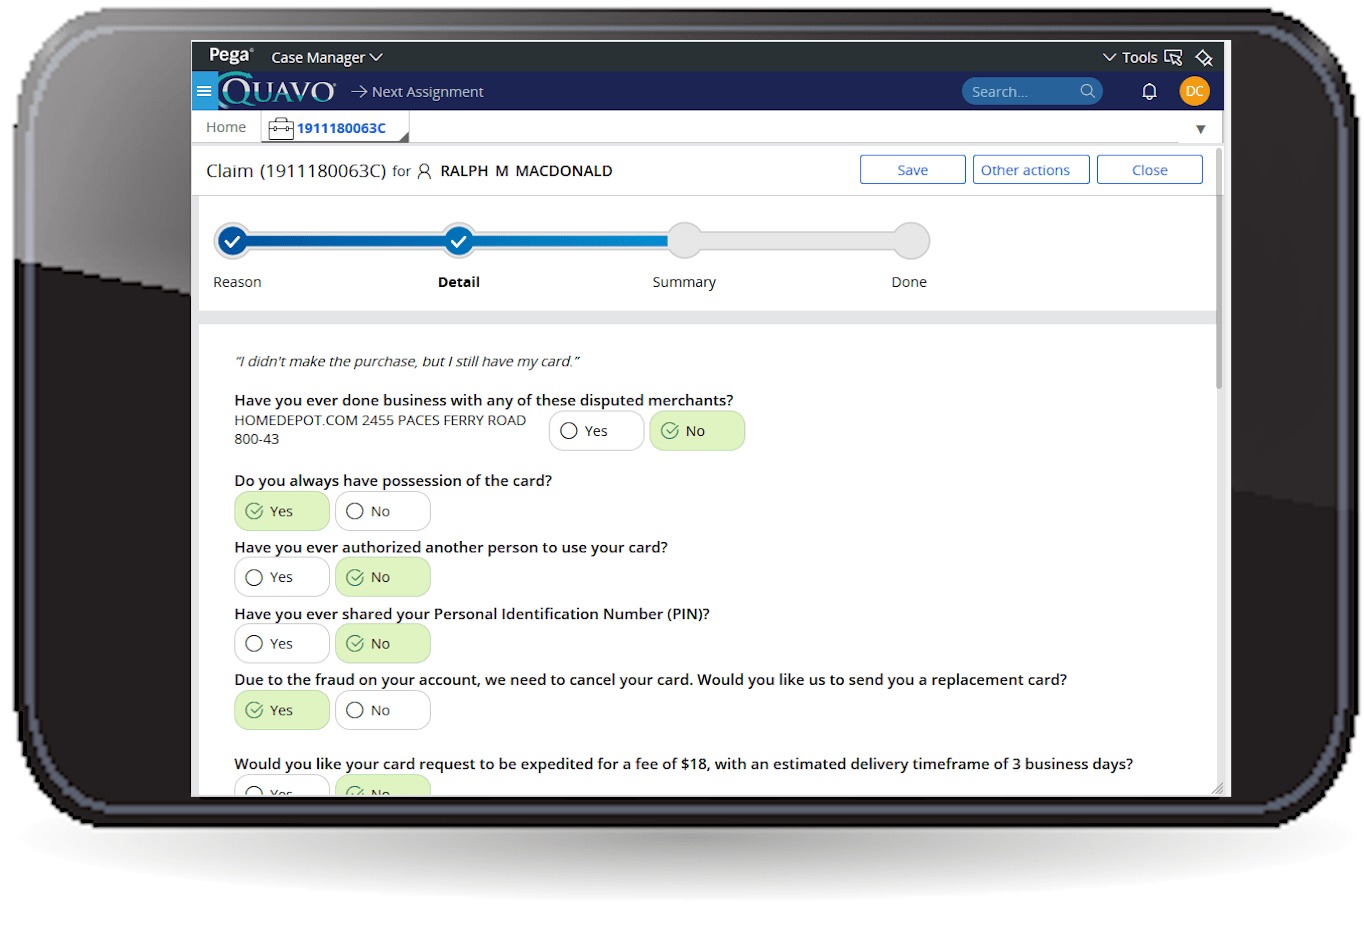 Automated dispute management software QFD intake questions shown on a tablet.